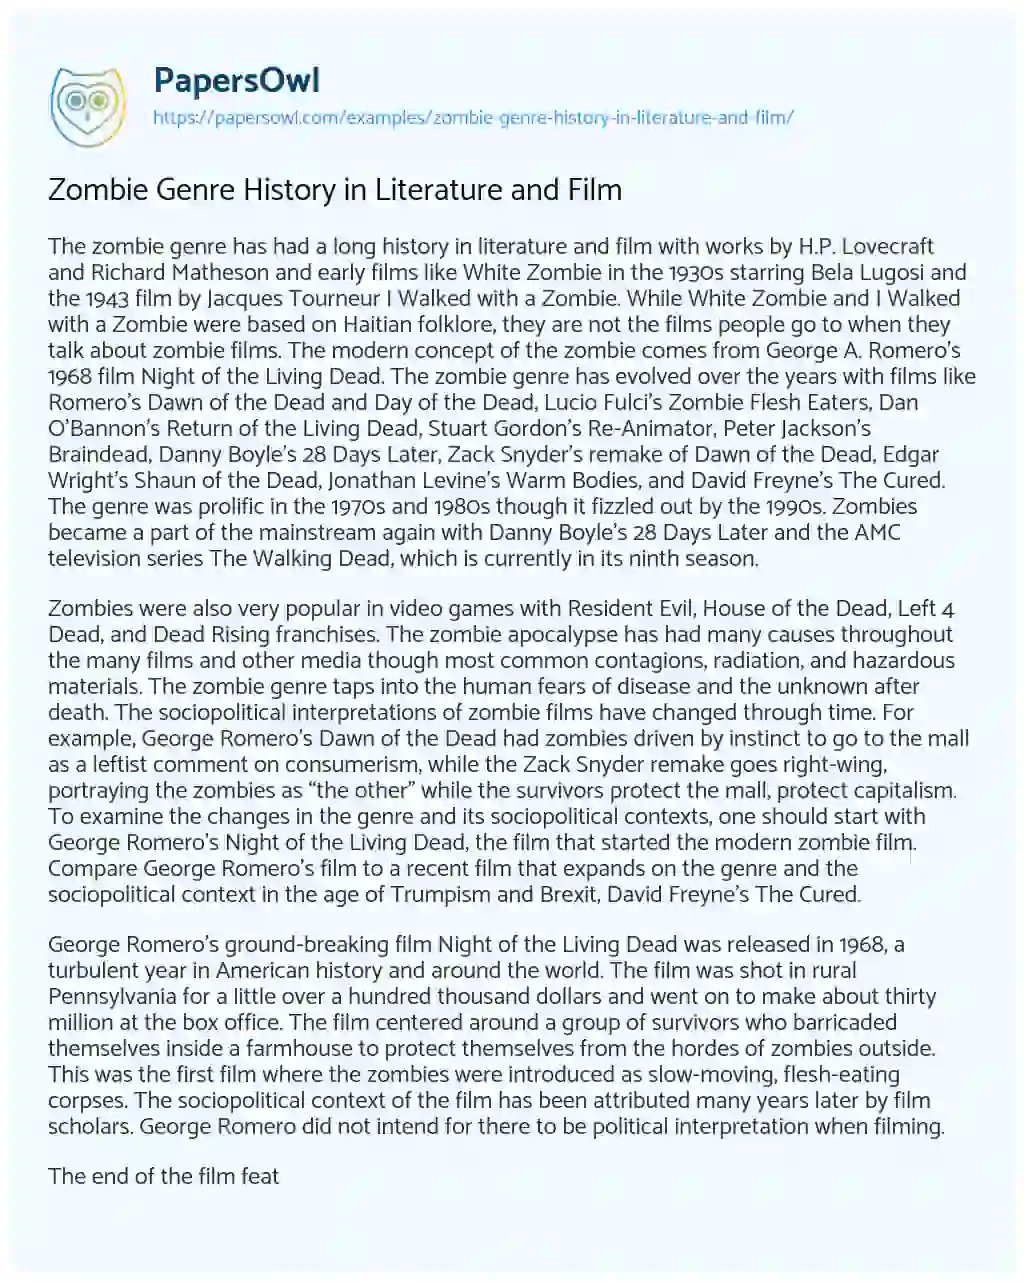 Essay on Zombie Genre History in Literature and Film